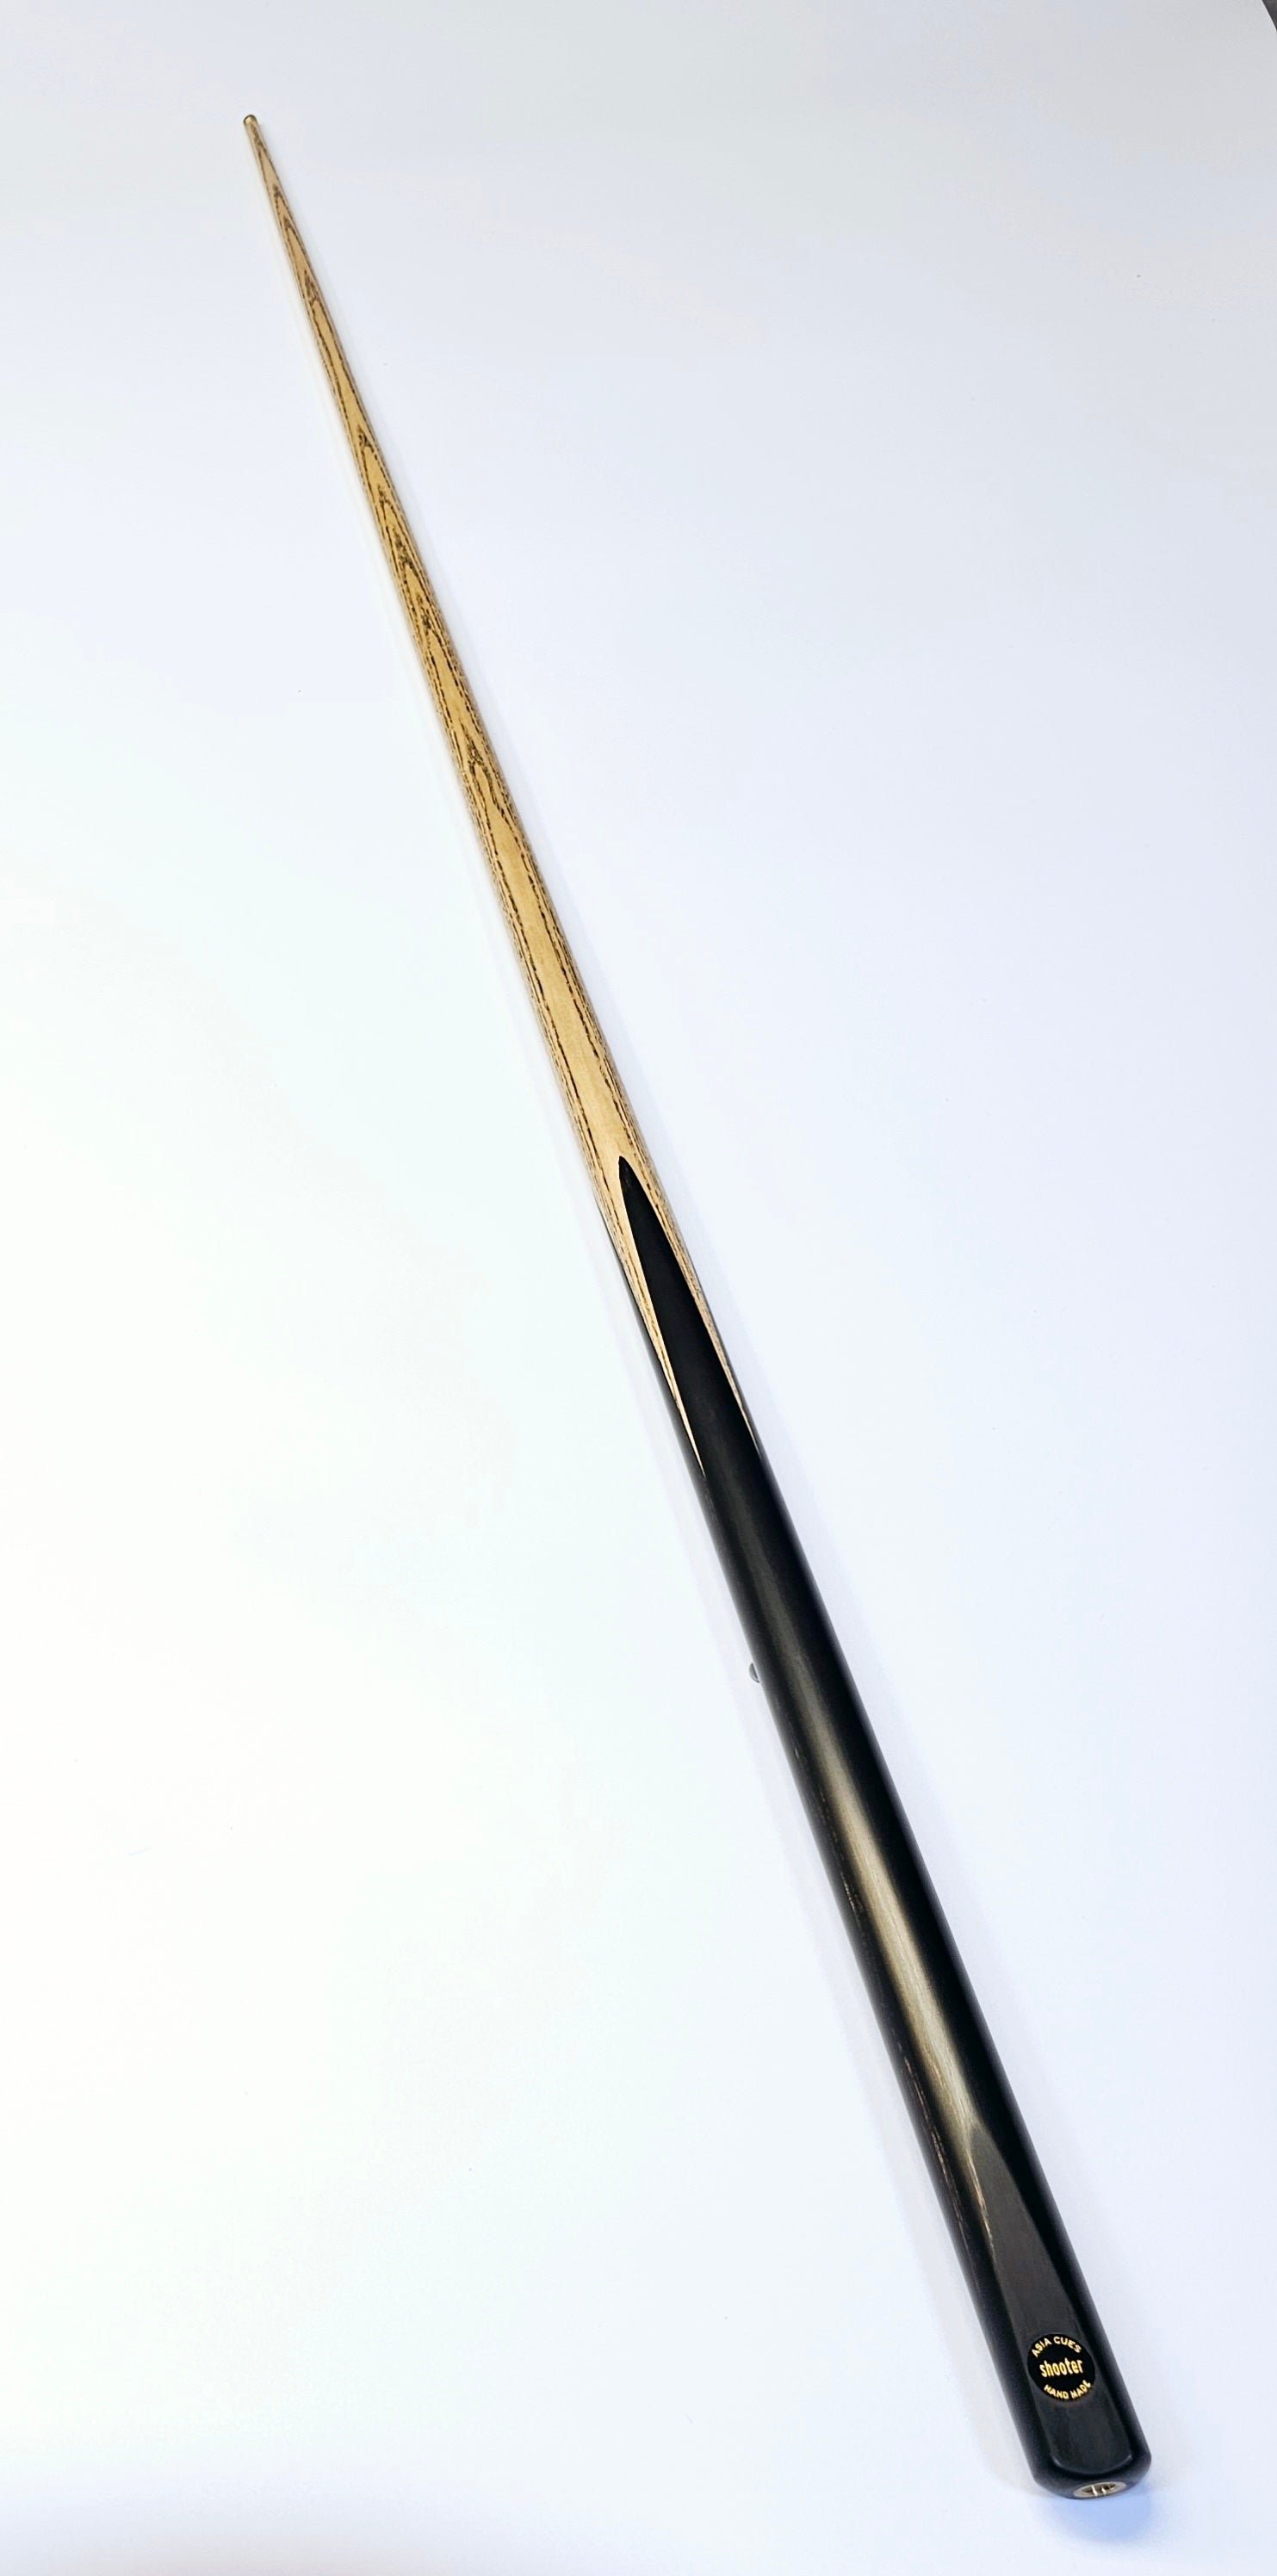 Asia Cues Shooter - One Piece Snooker Cue 9.6mm Tip, 17.7oz, 57"